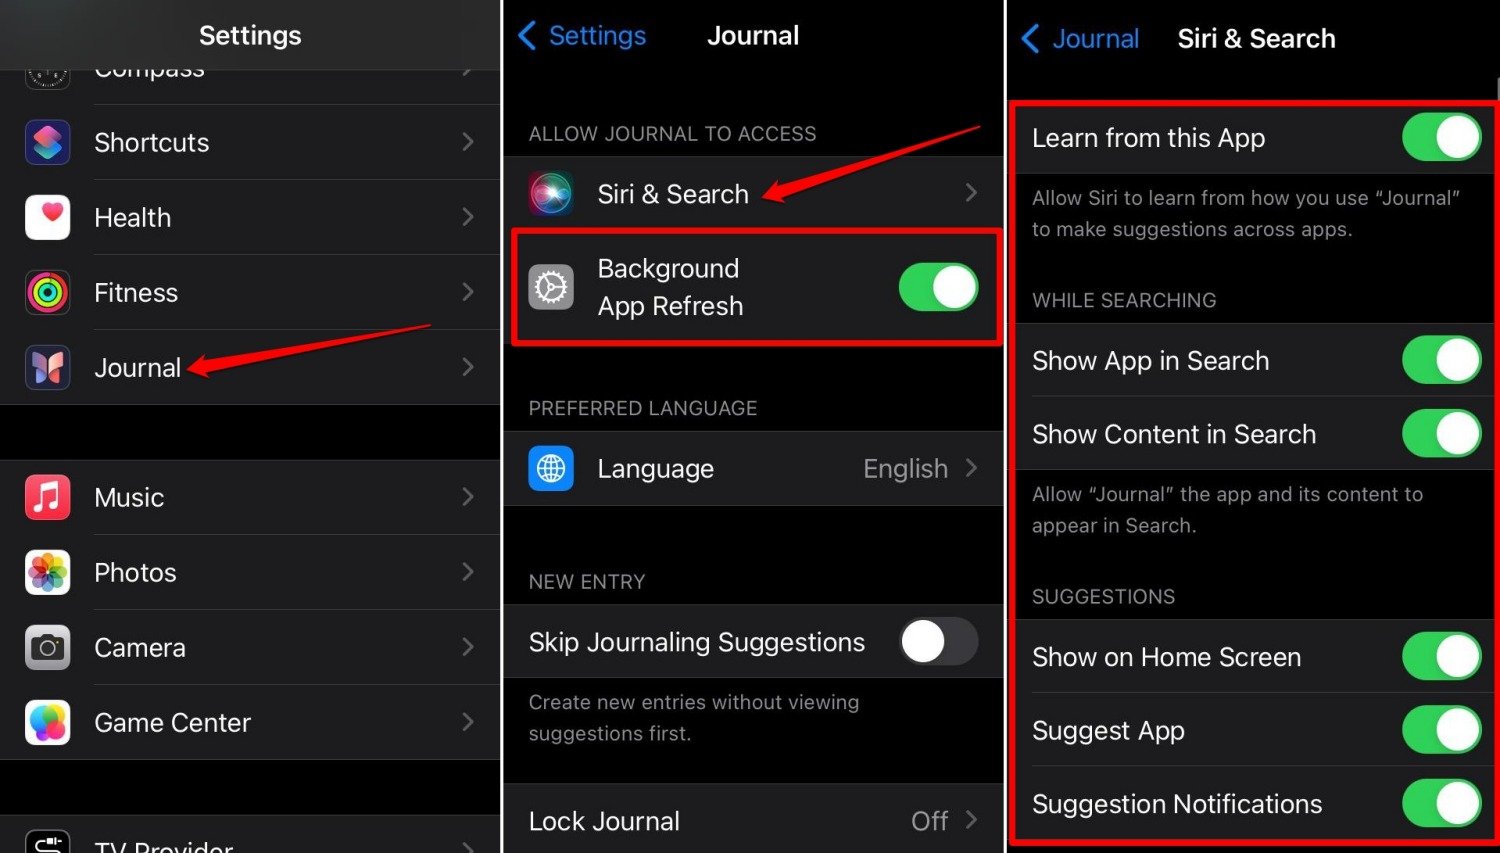 allow permissions for the Journal app